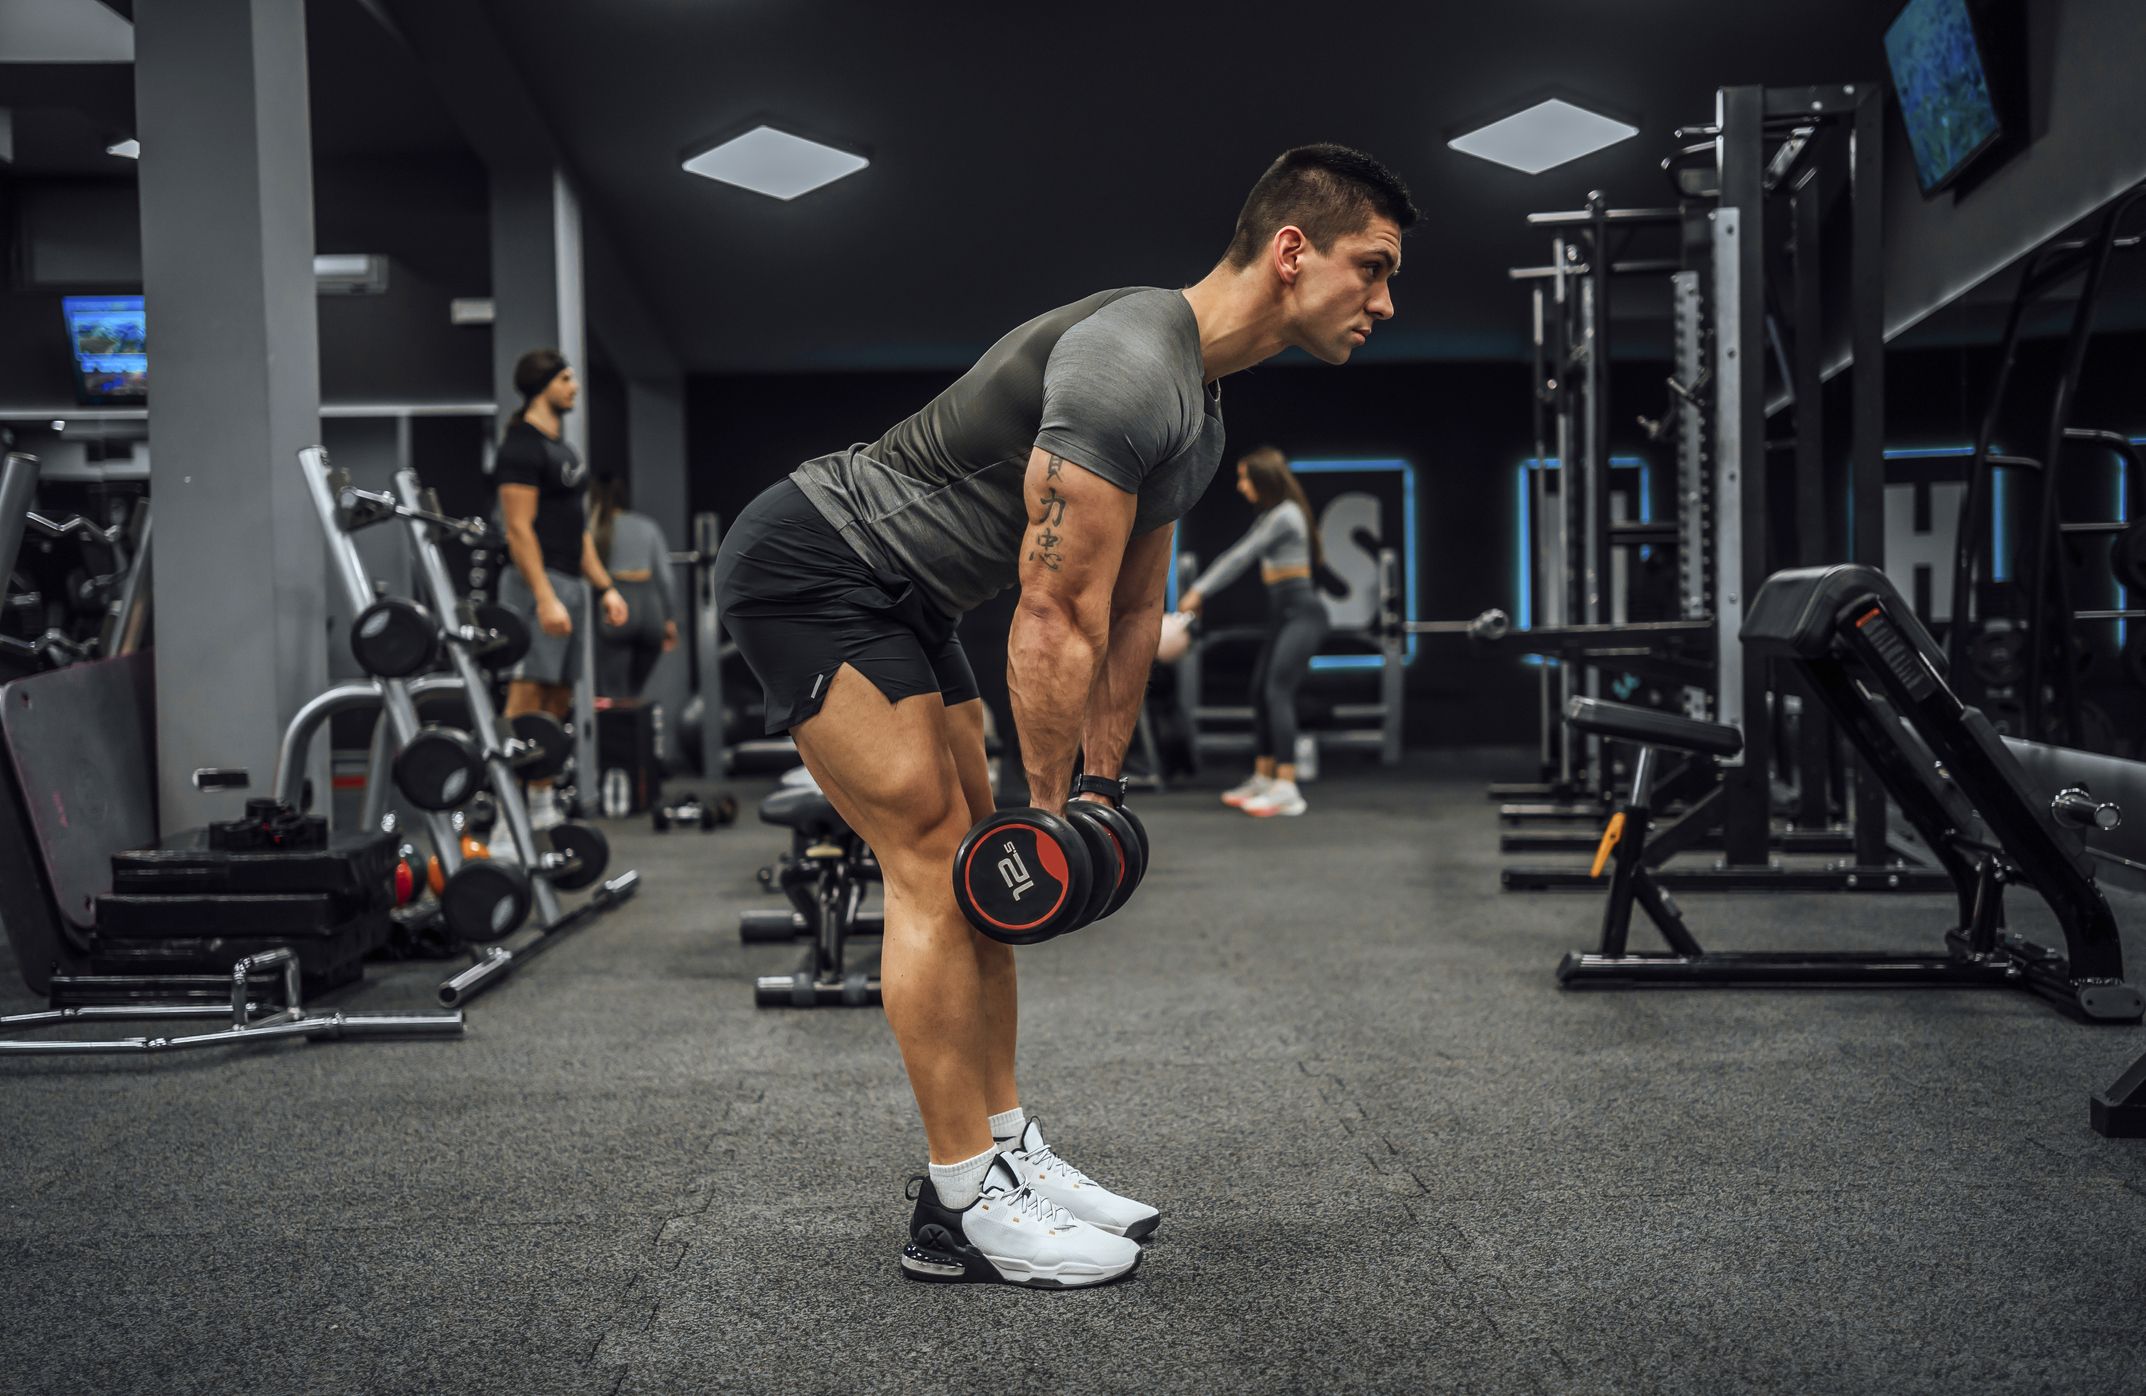 15 Best Hamstring Exercises for Lower Body Leg Day Workouts